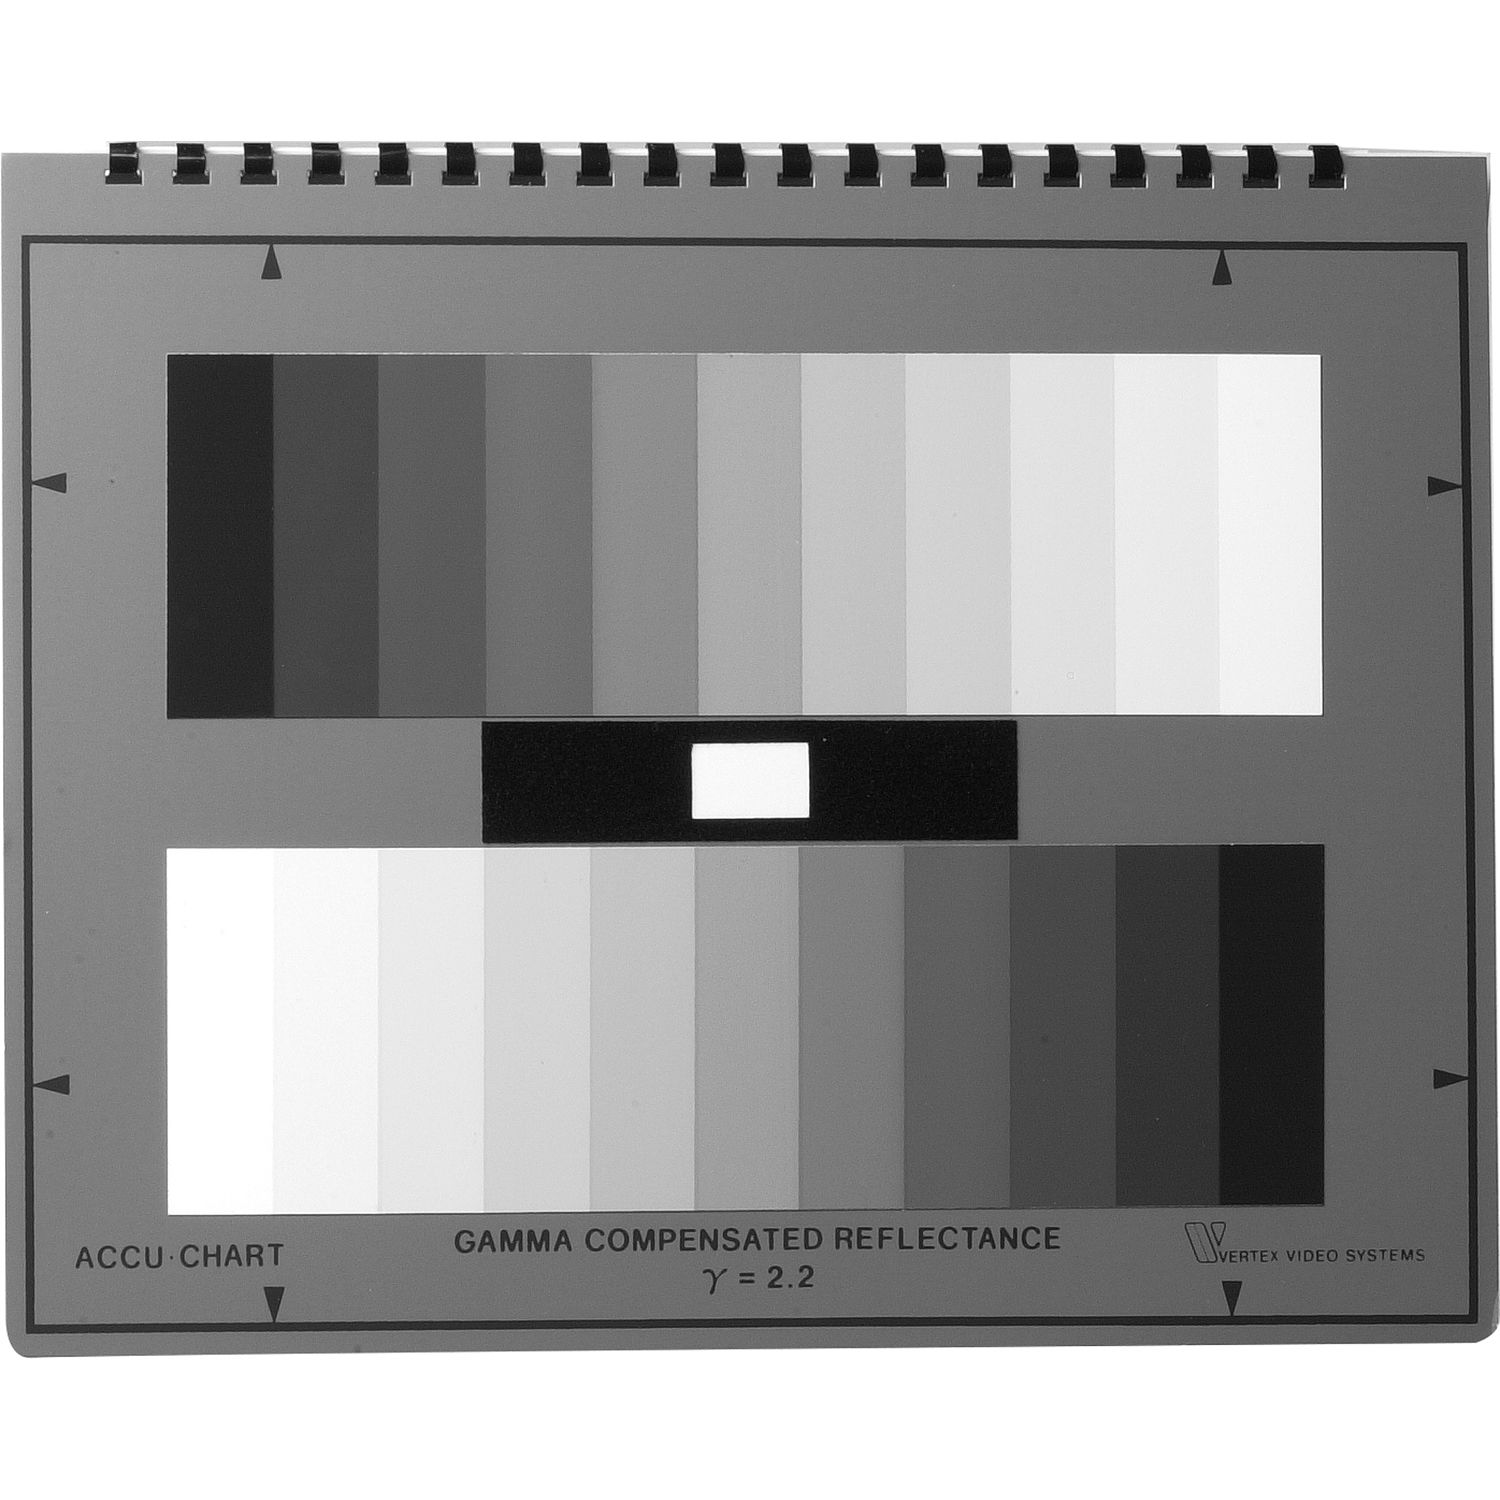 Grayscale Test Chart